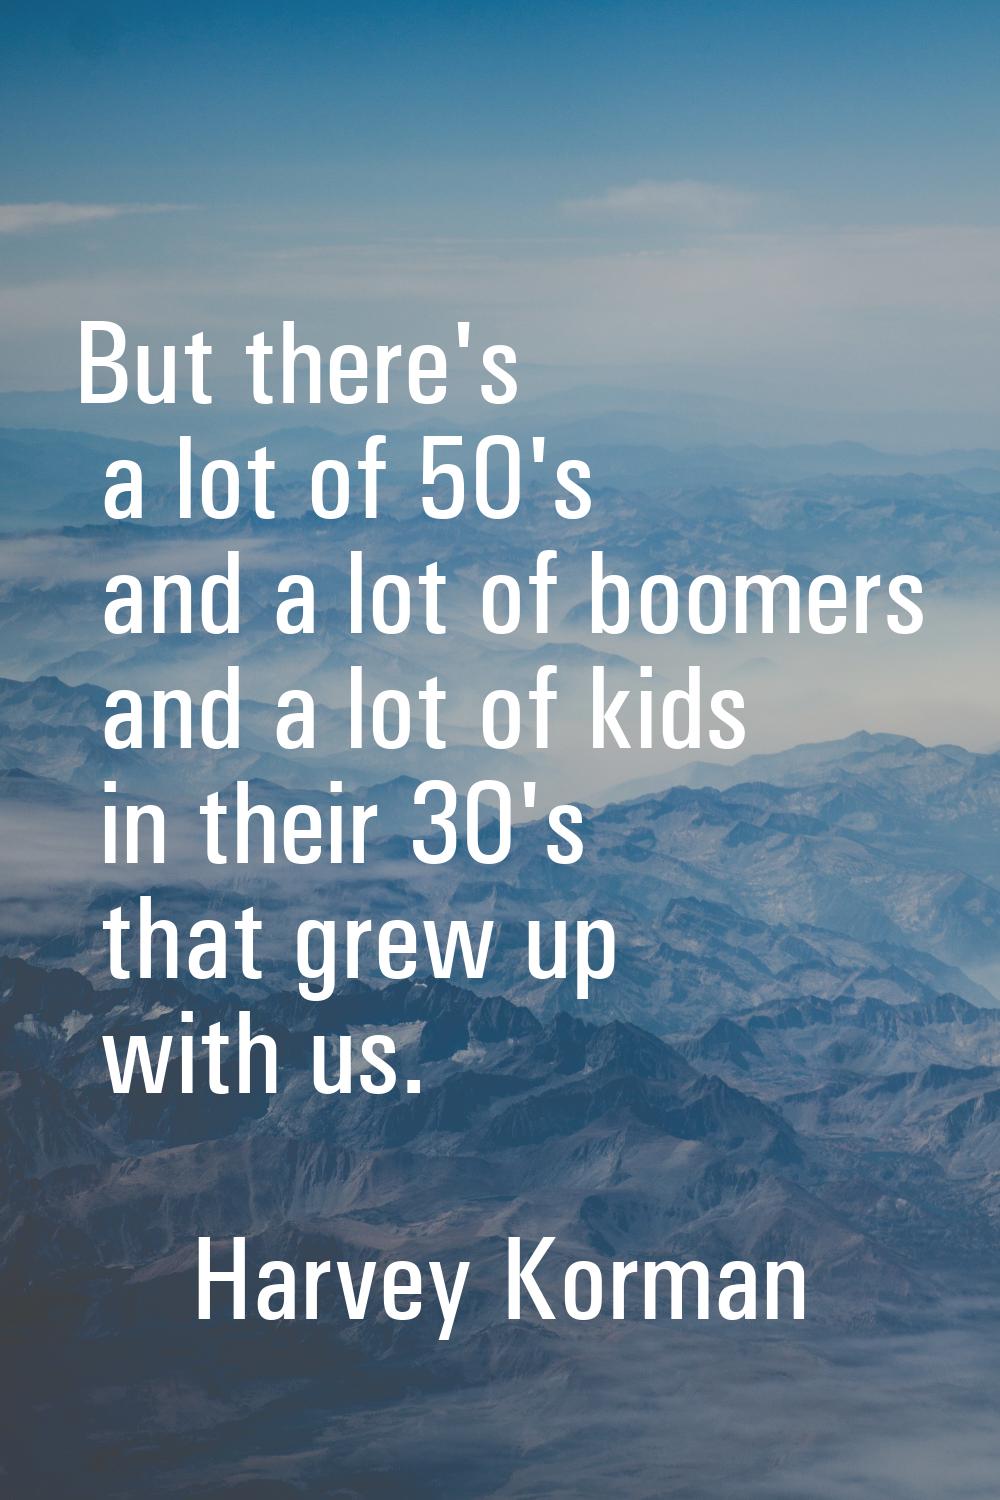 But there's a lot of 50's and a lot of boomers and a lot of kids in their 30's that grew up with us